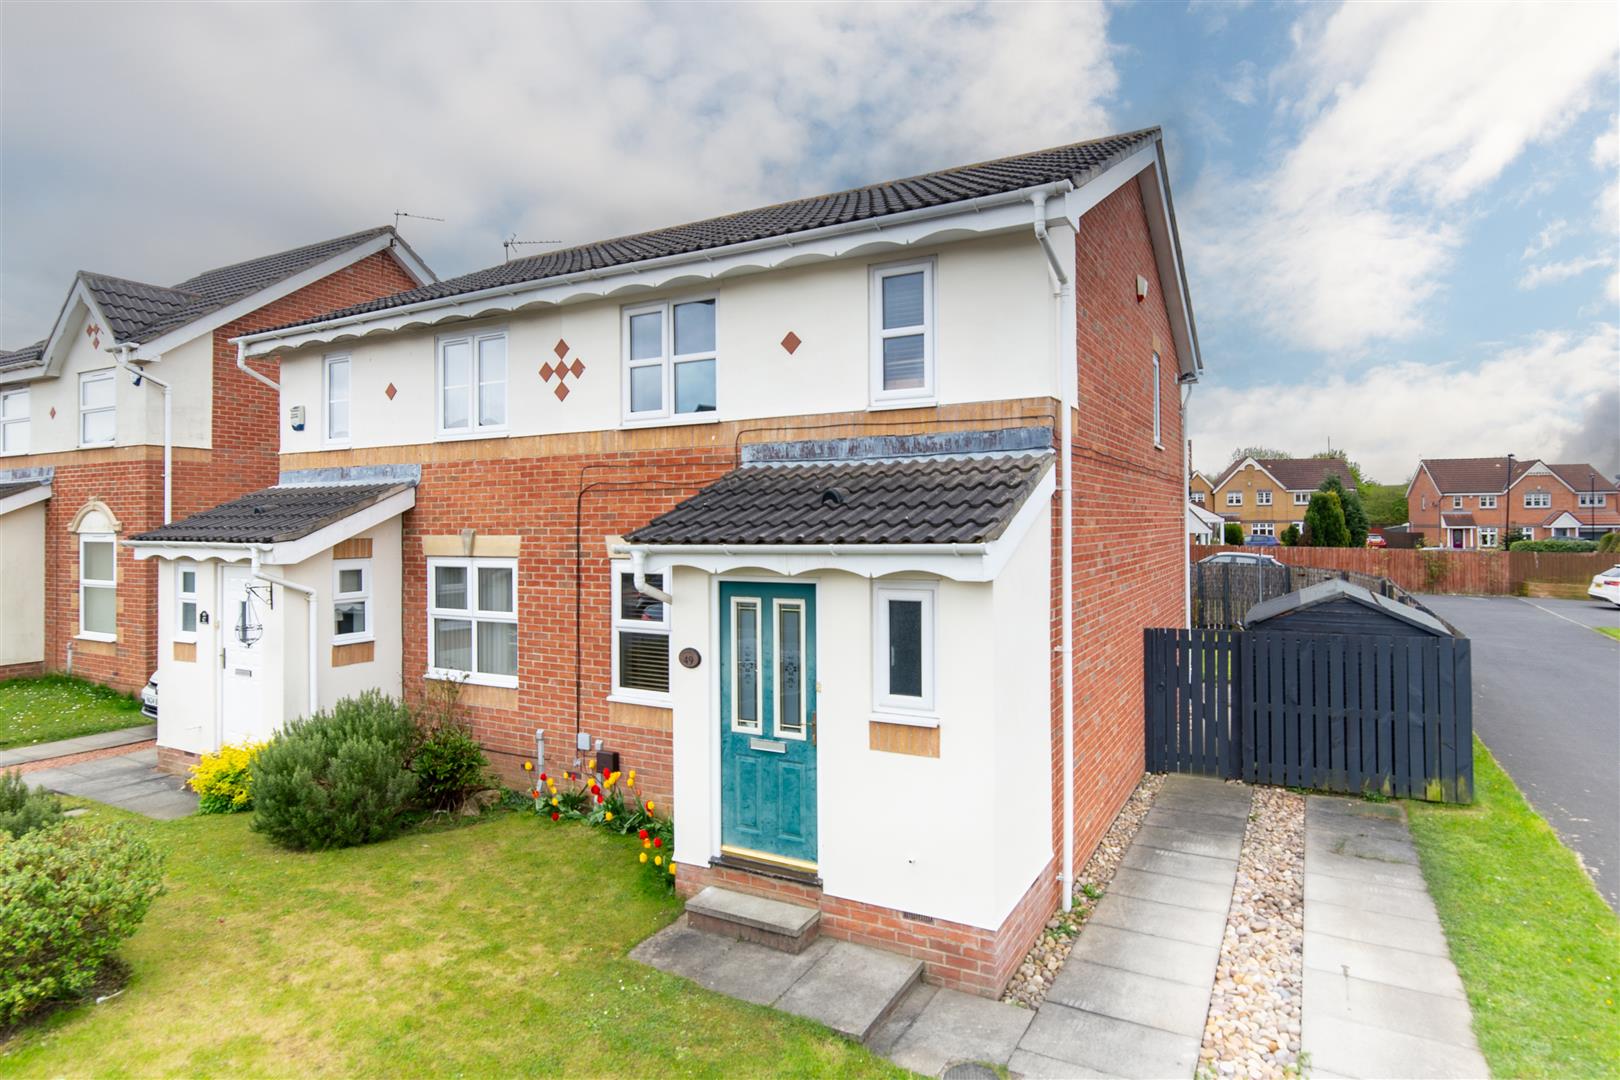 3 bed semi-detached house for sale in Greenhills, Newcastle Upon Tyne, NE12